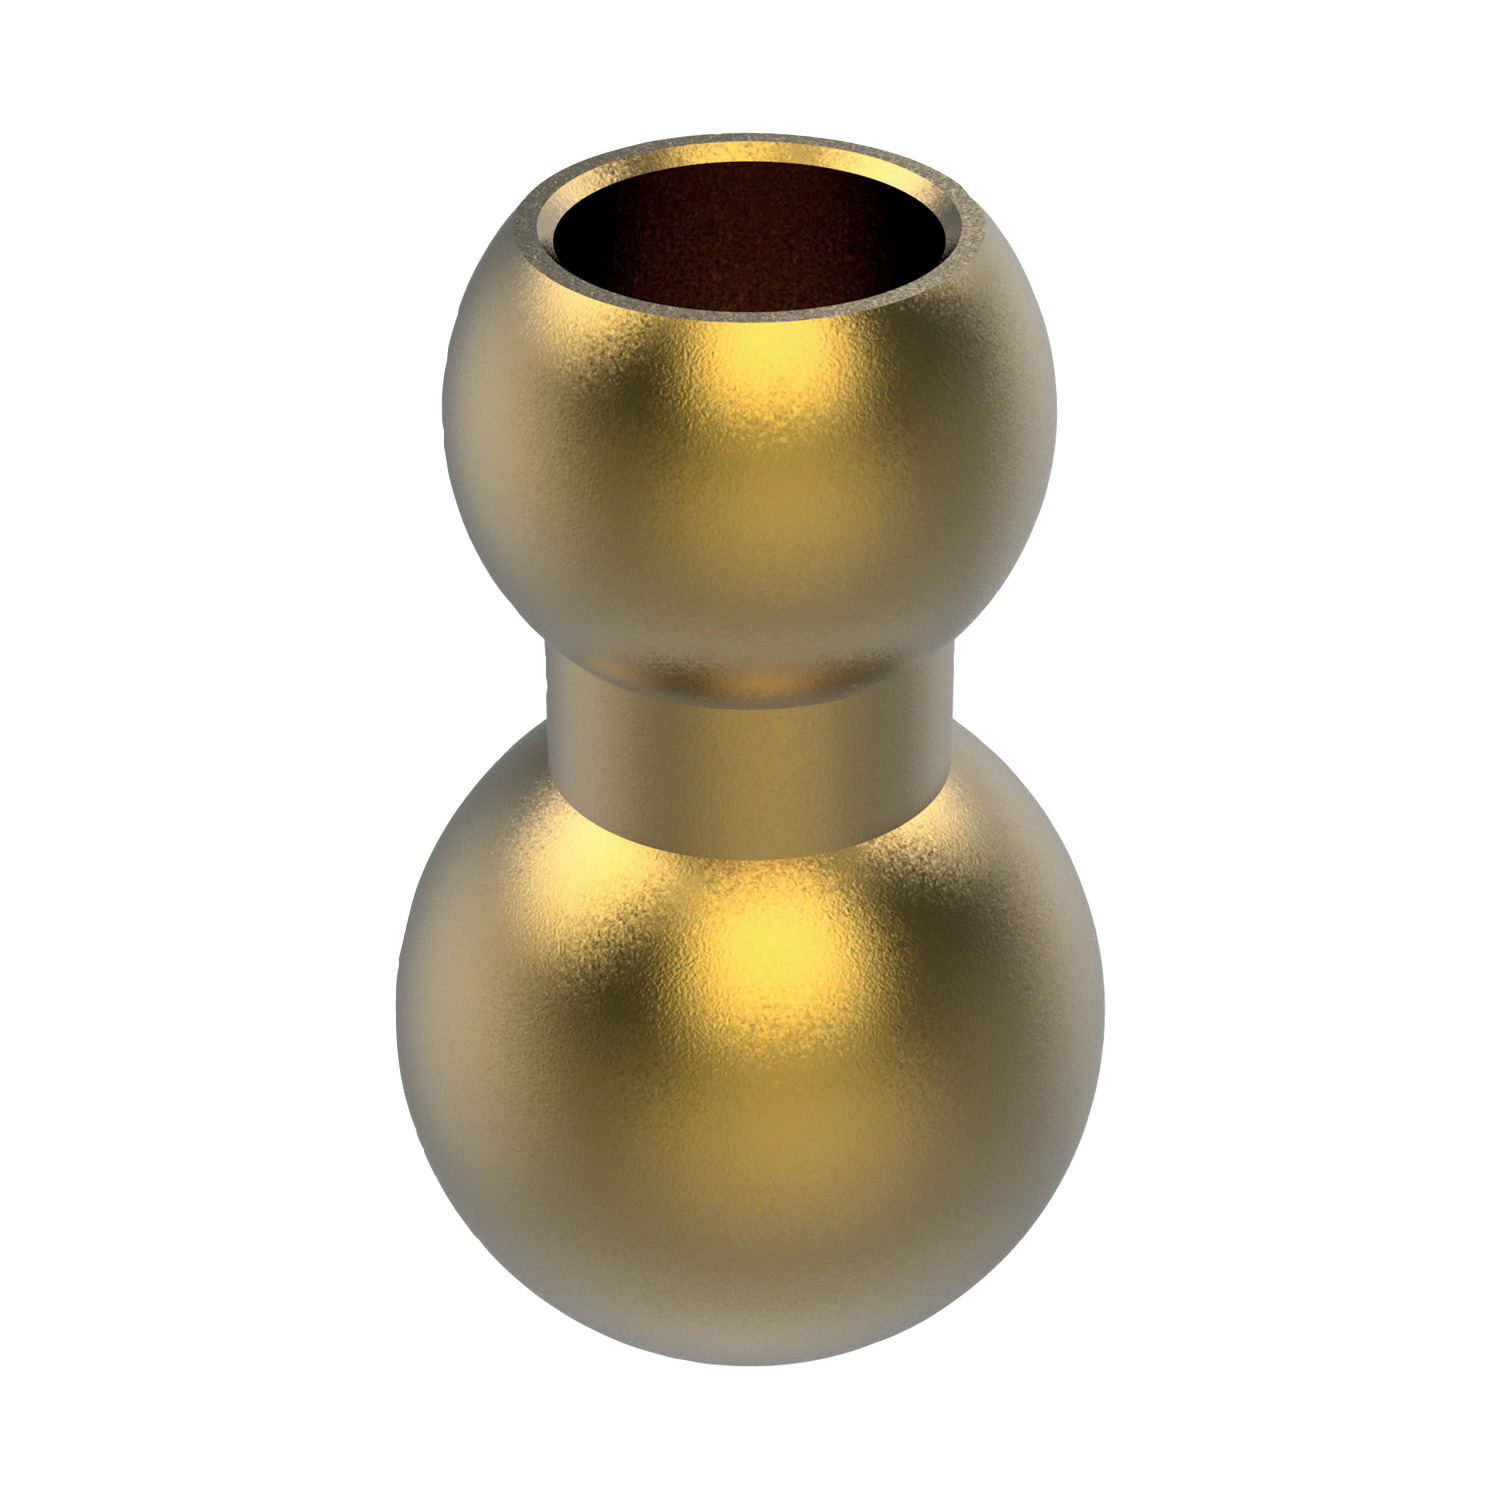 6 bar Modular Coolant Nozzles Suitable for most CNC and manual machine tools because of the compact design with an incredible range of movement.